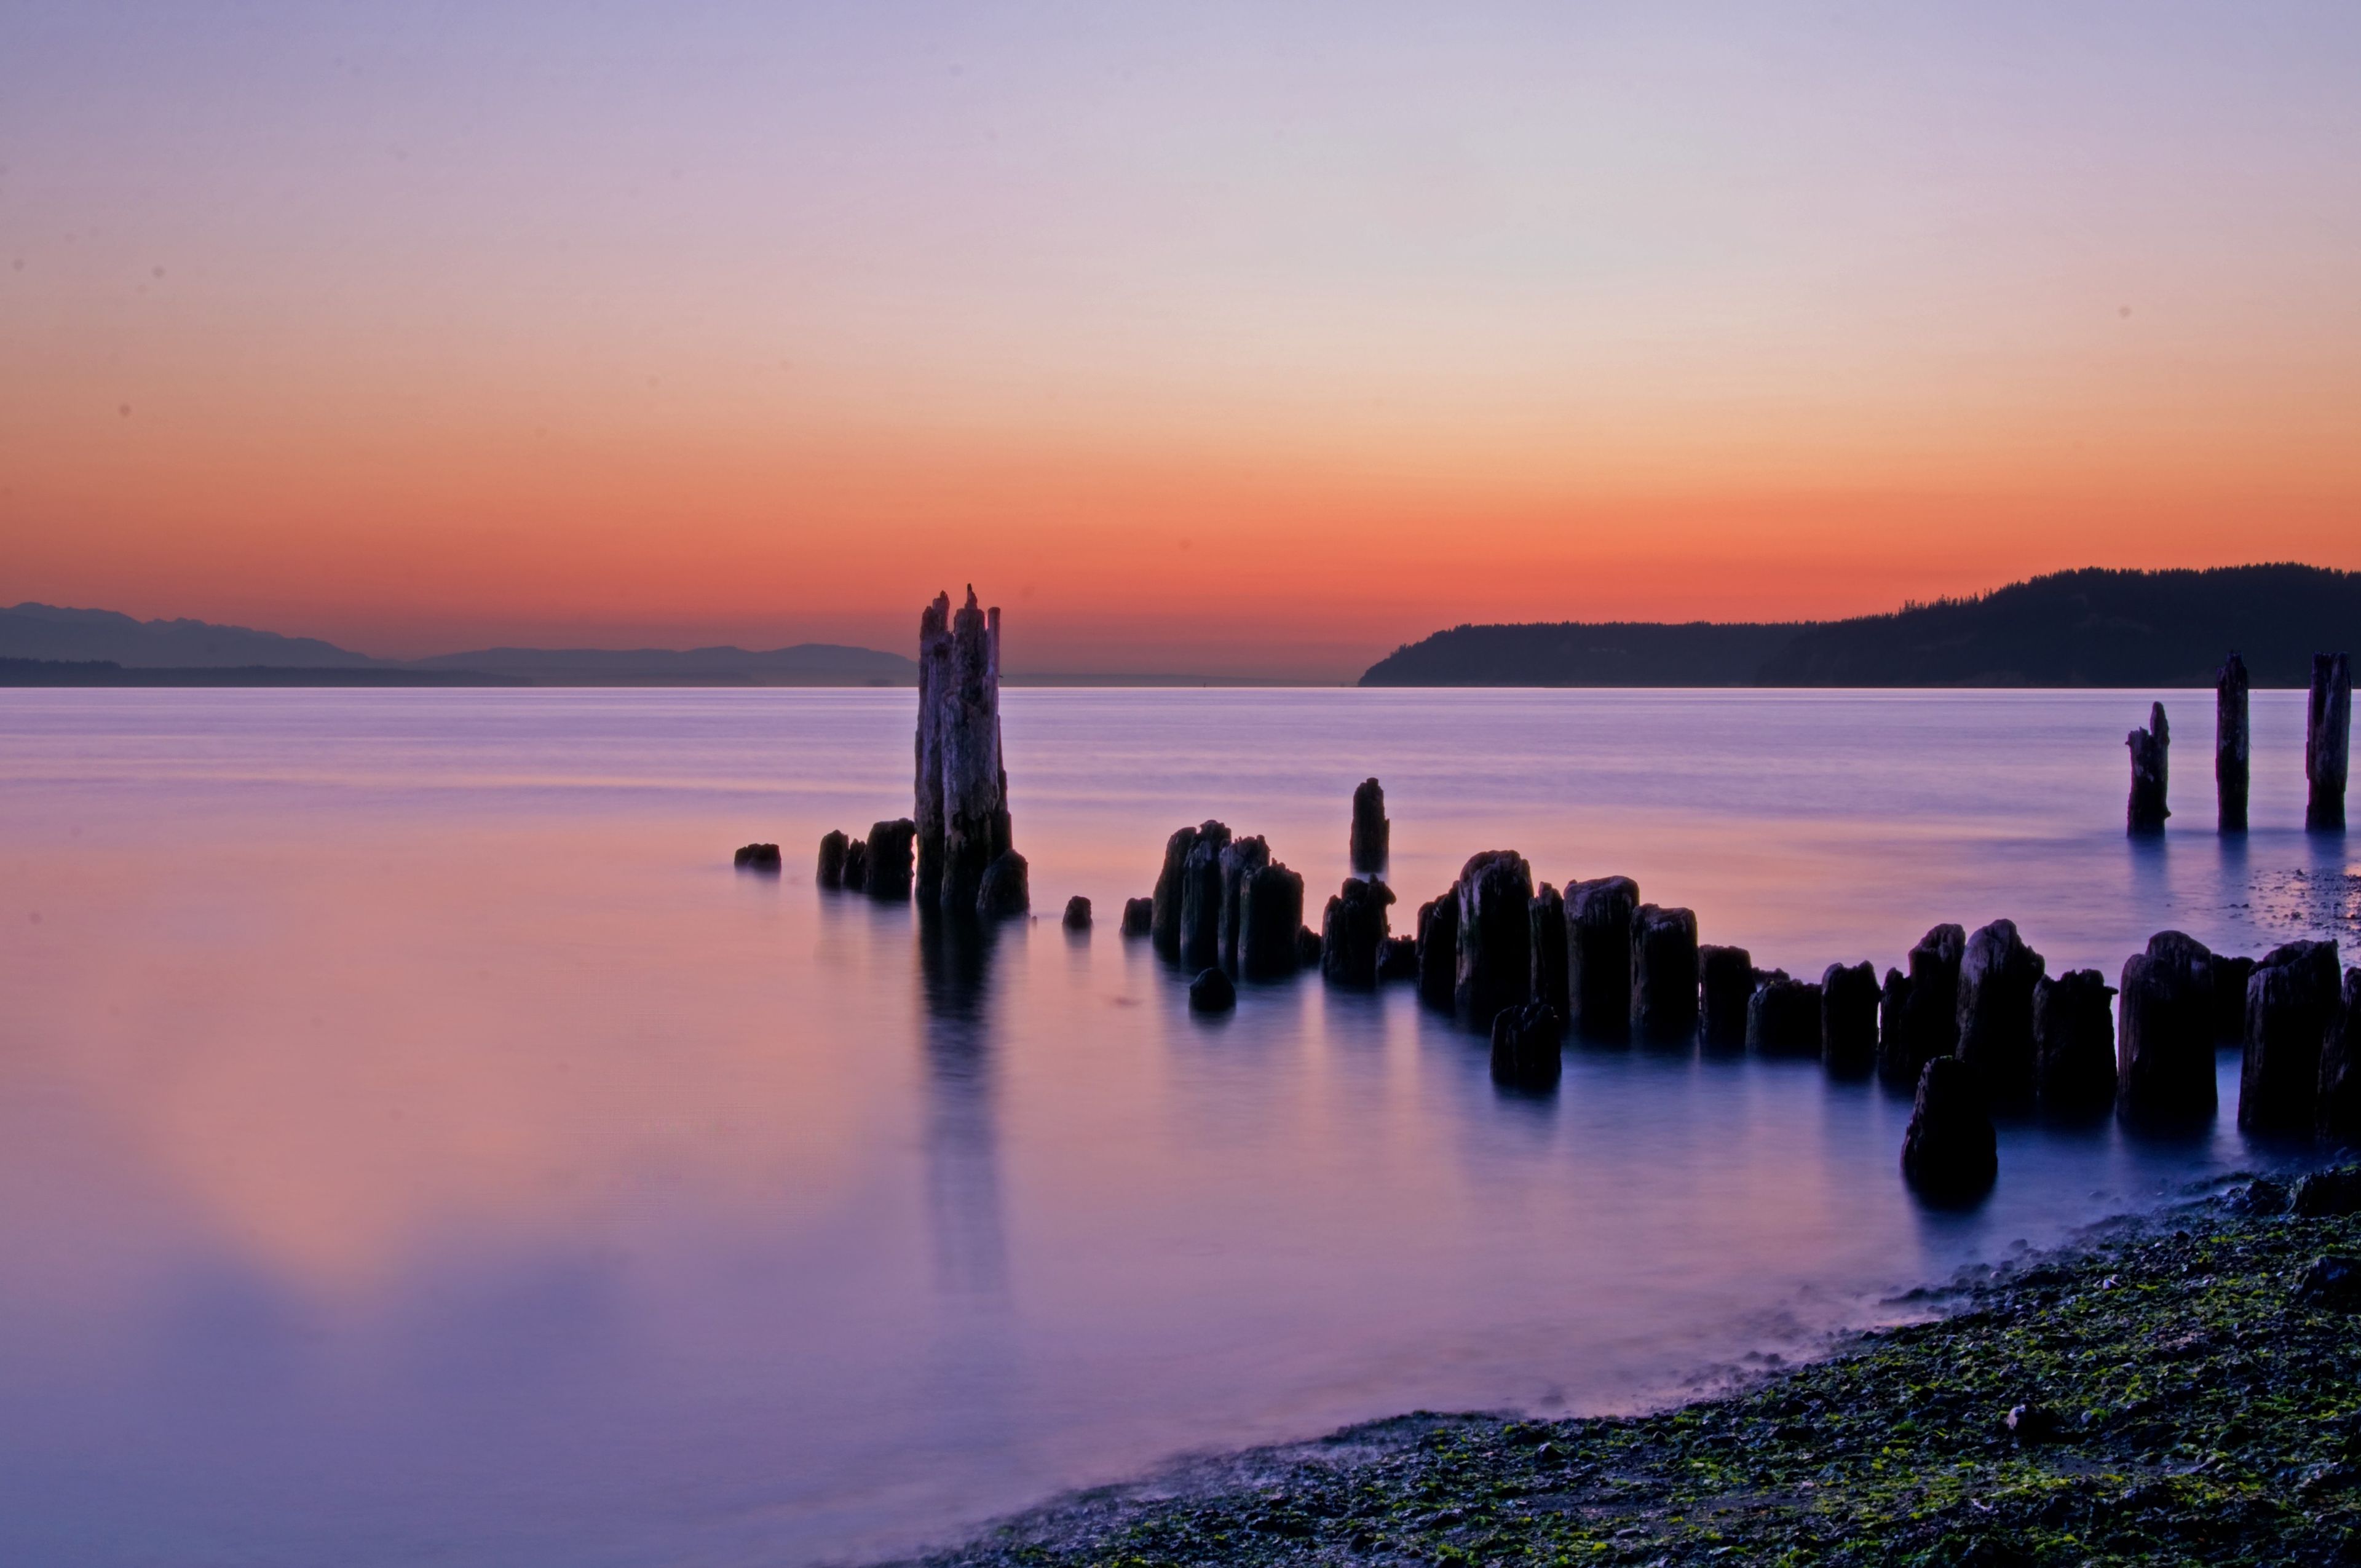 An old pier extends out into the water, with a sunset in the background.